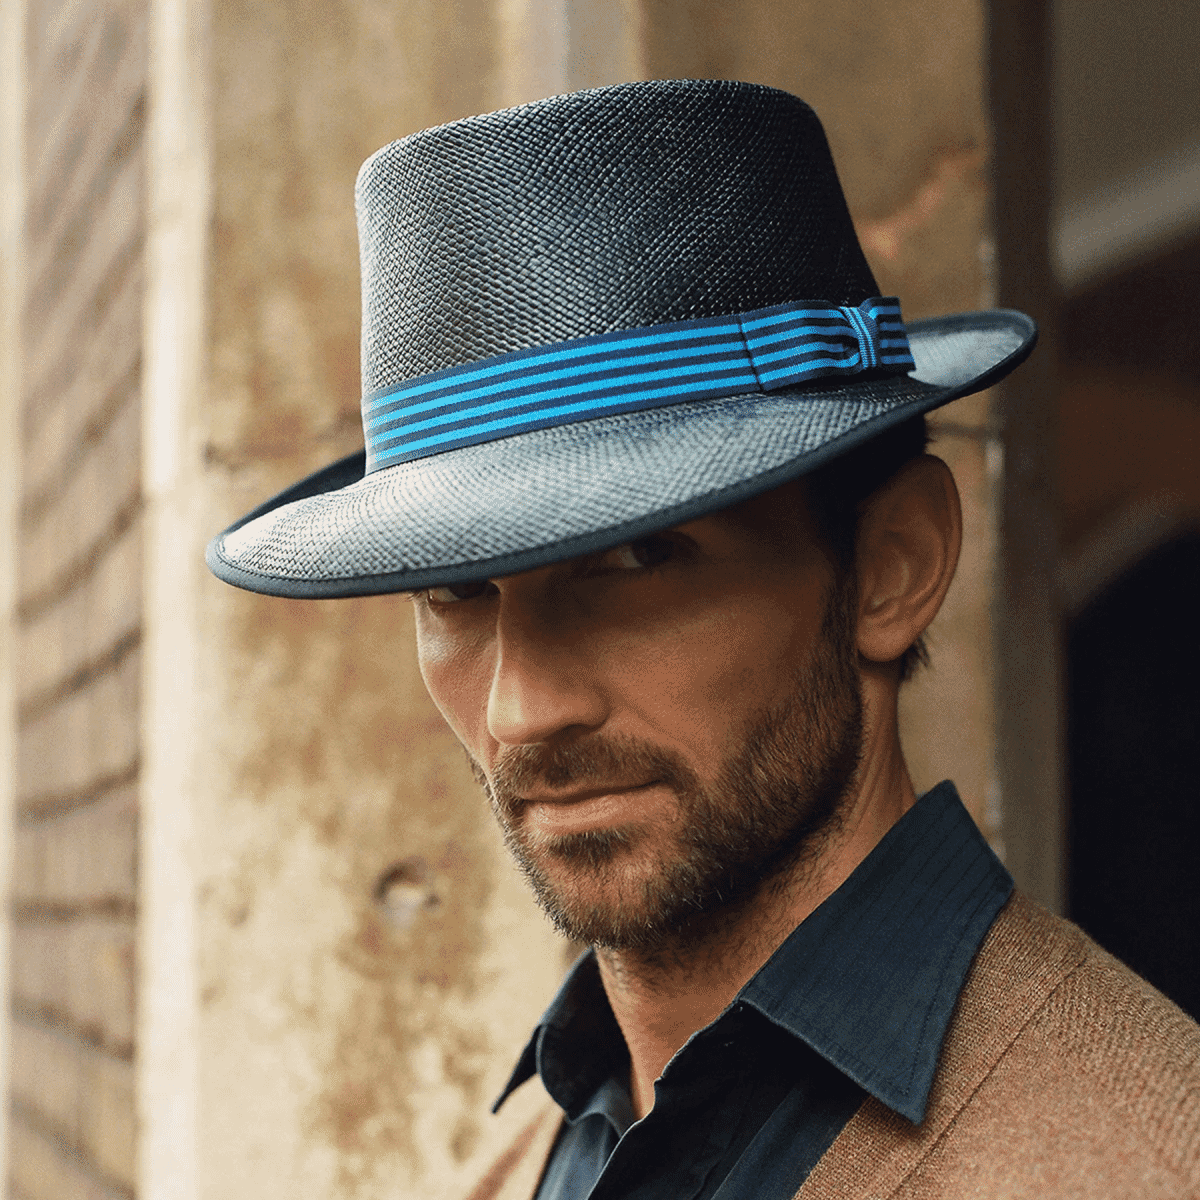 The 30 Best Hats for Men To Buy in 2023